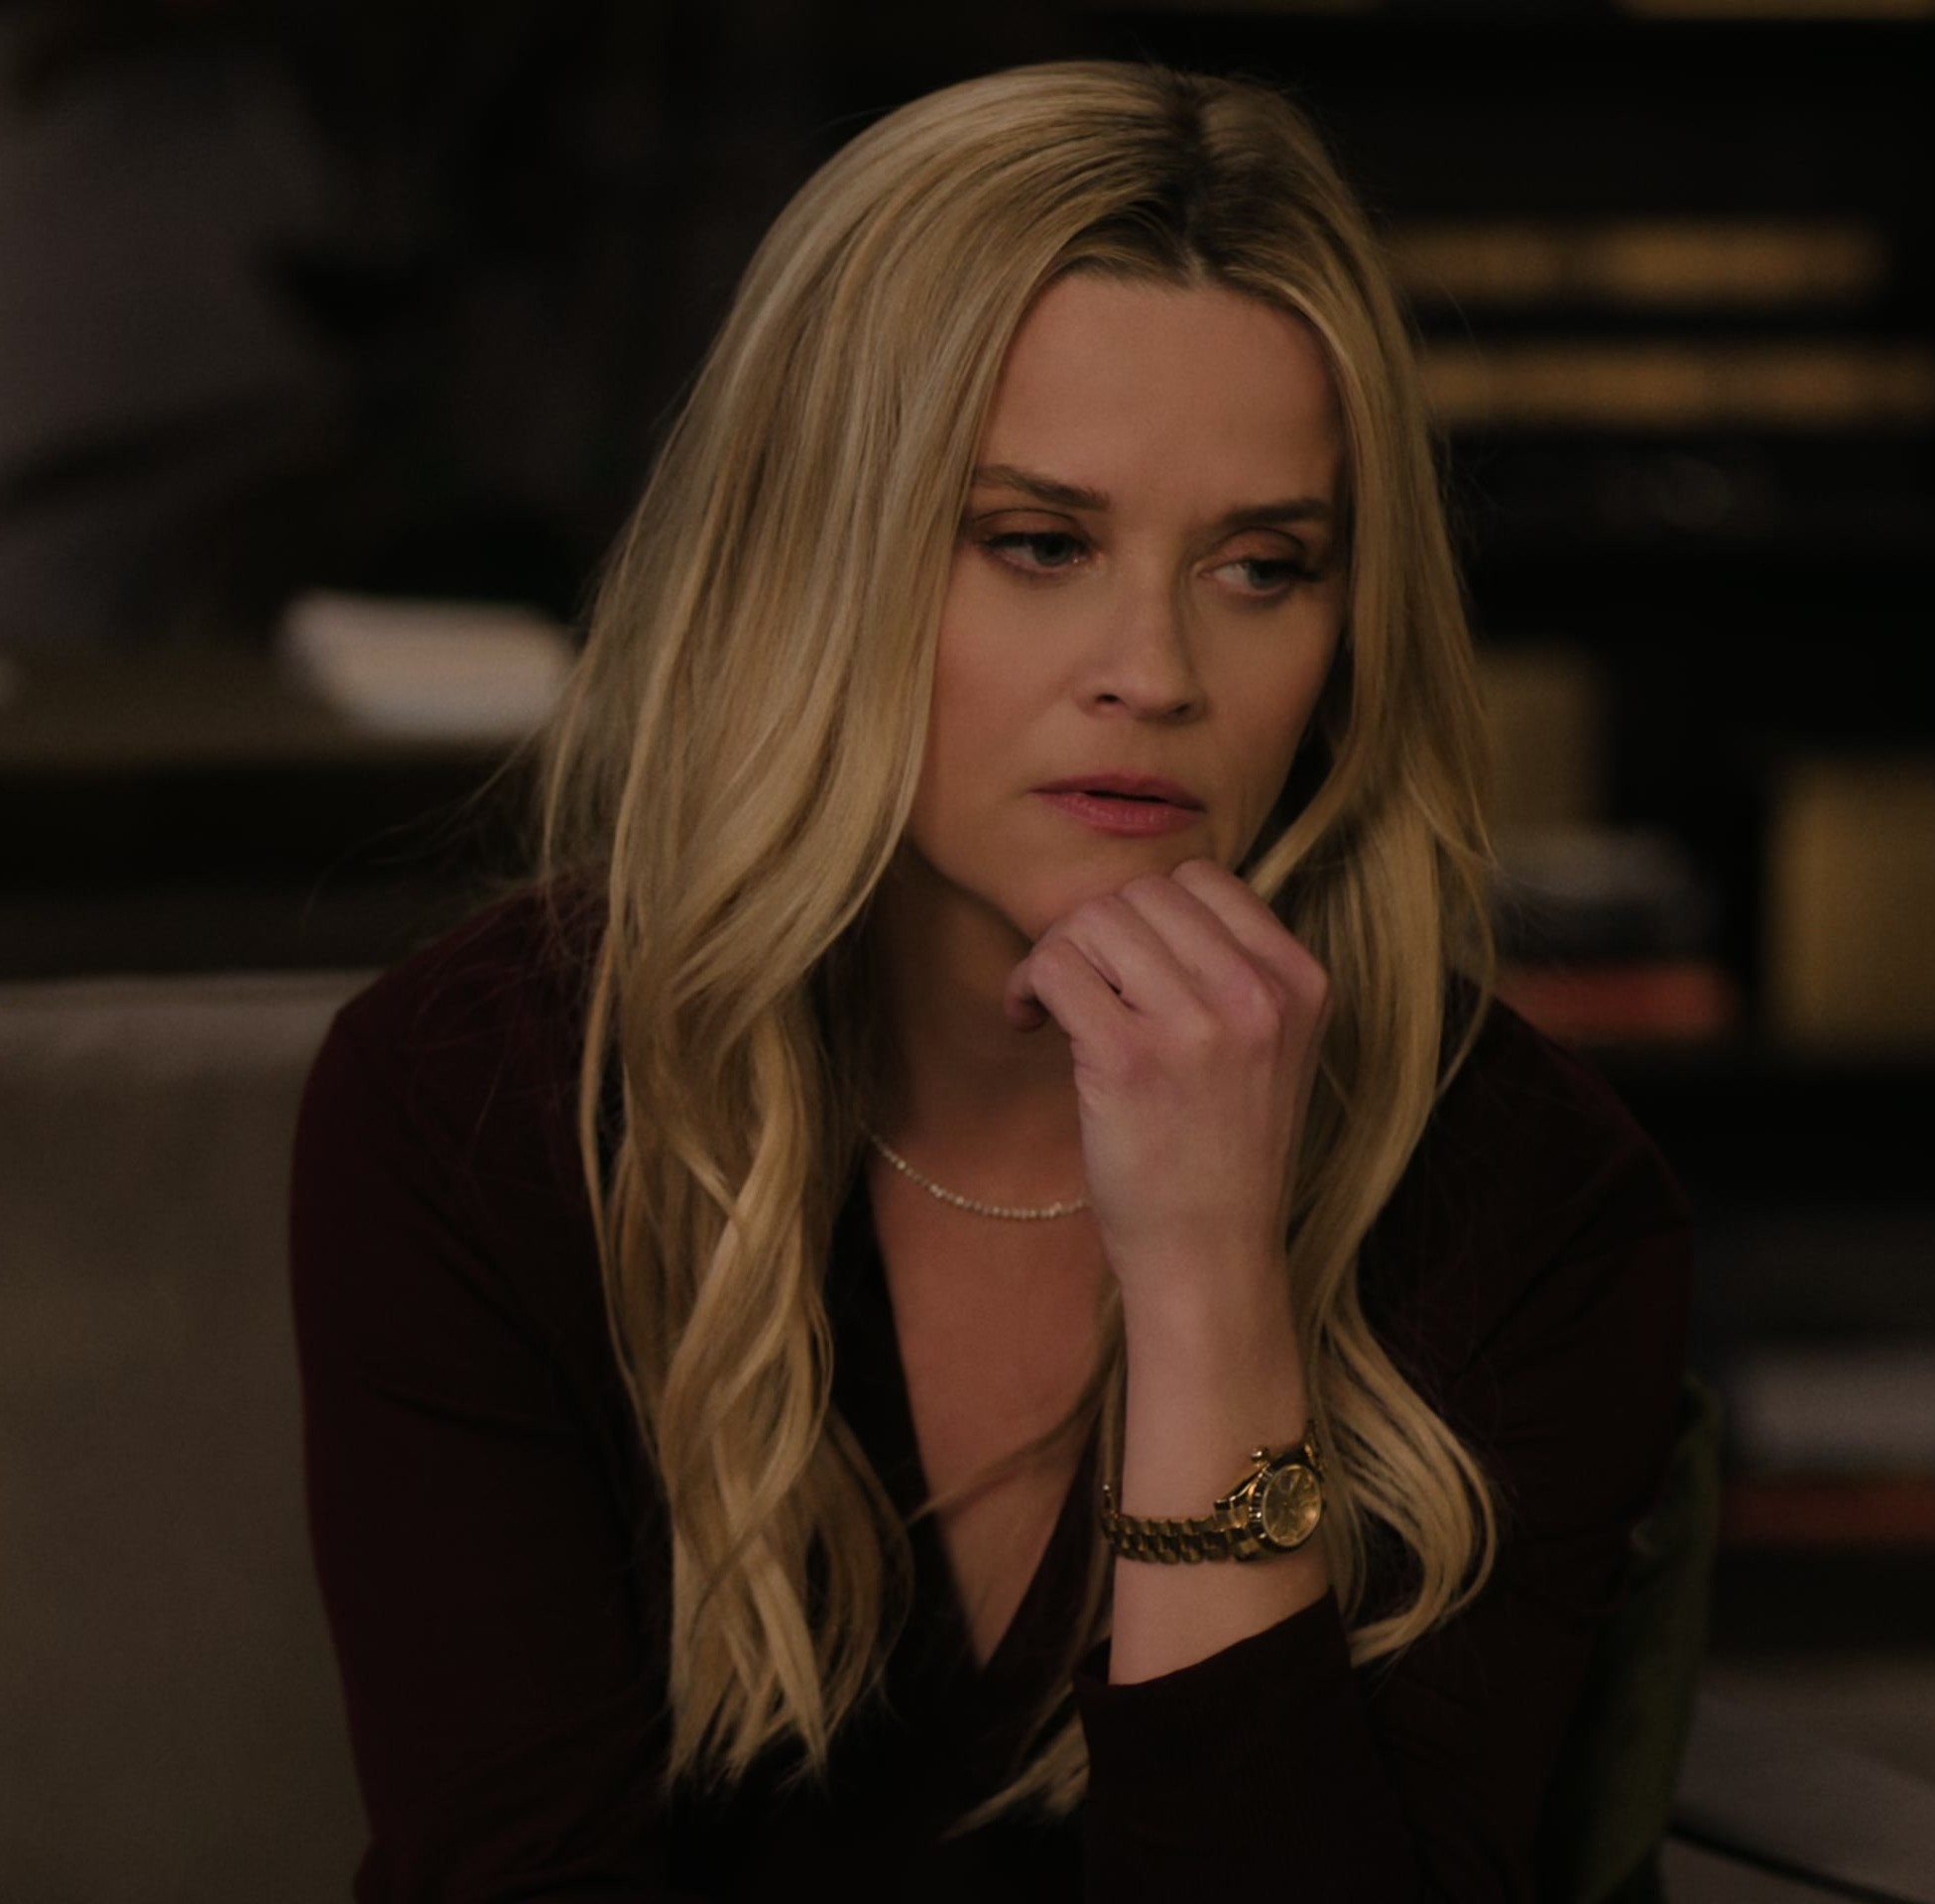 Worn on The Morning Show TV Show - Gold Watch of Reese Witherspoon as Bradley Jackson